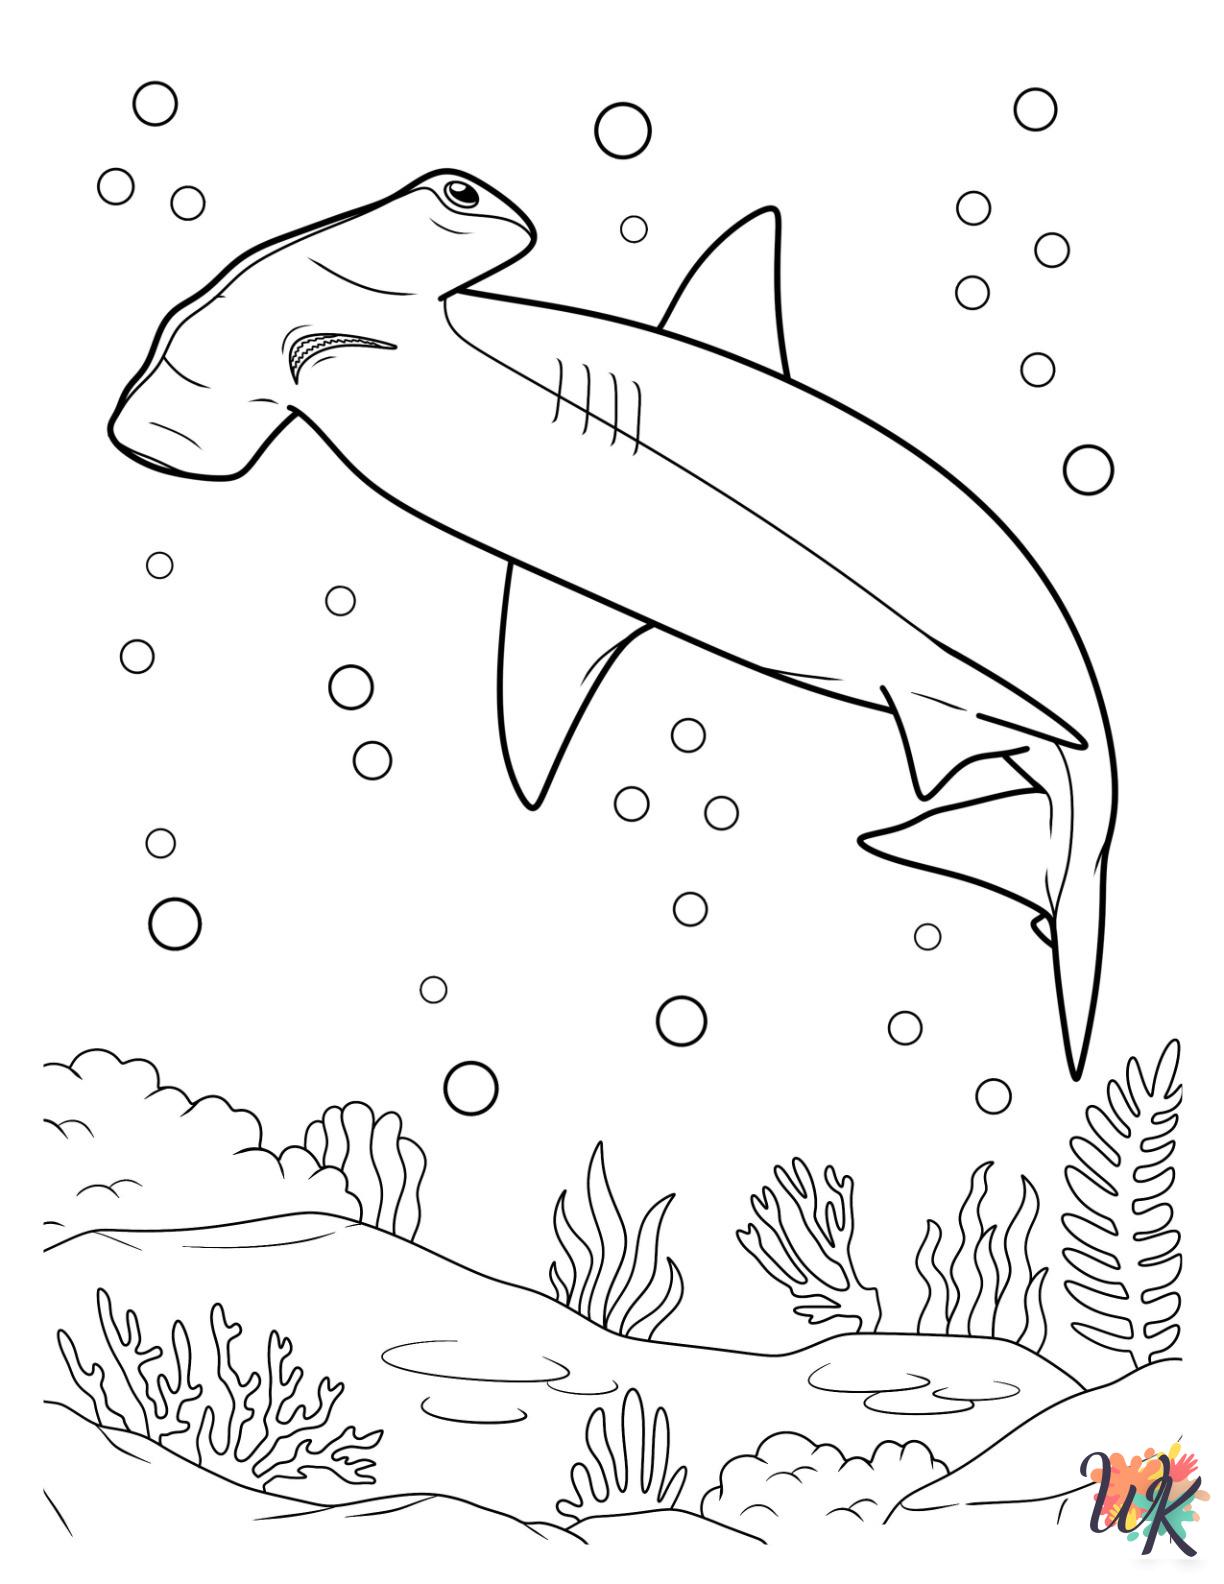 Hammerhead Shark ornaments coloring pages